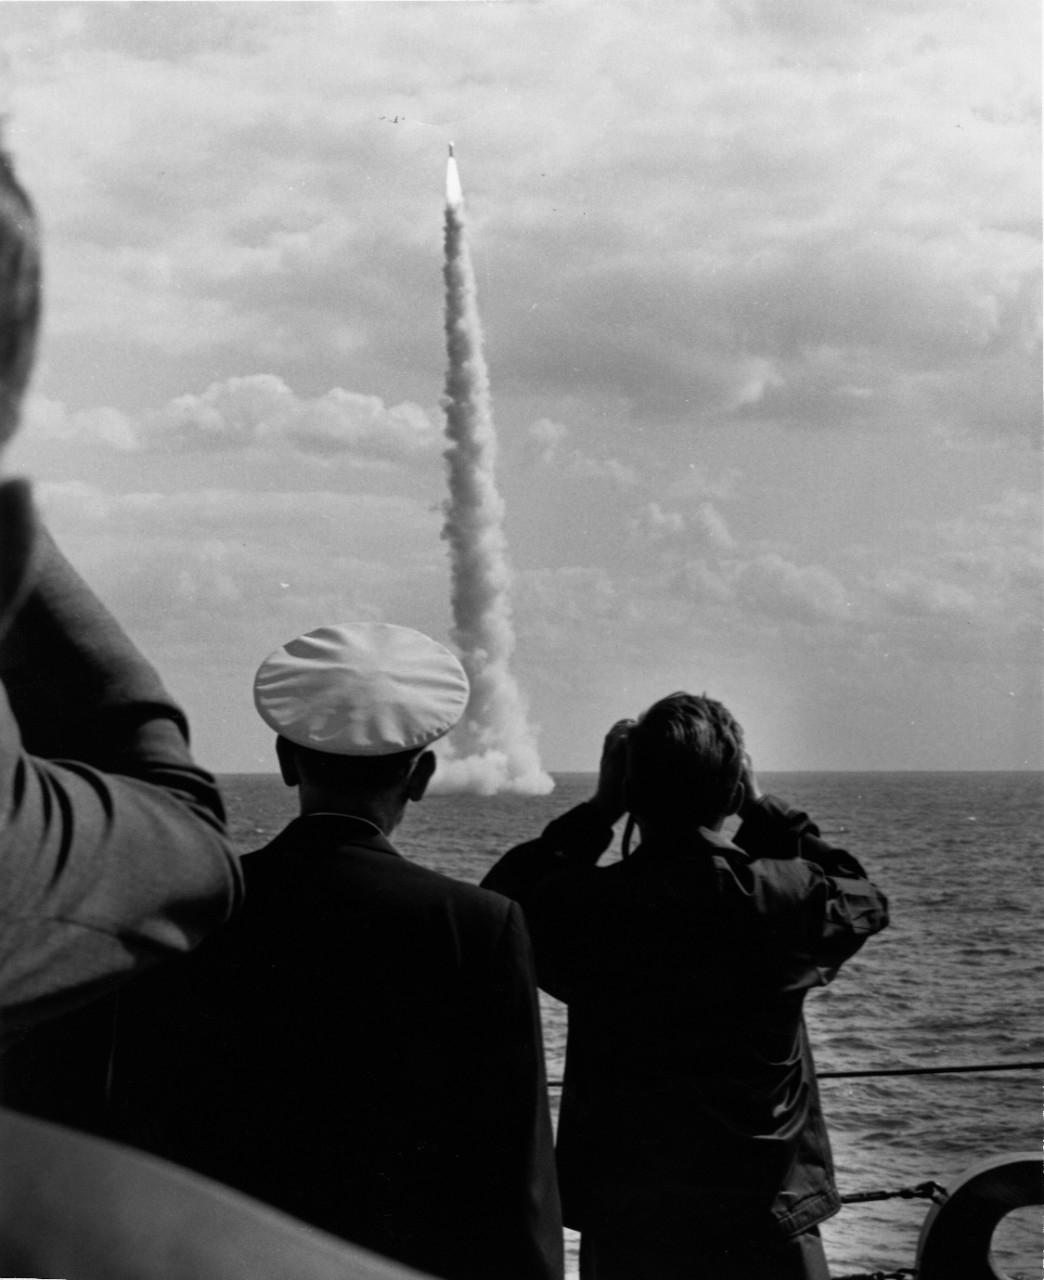 President John F. Kennedy observed the launch of a Polaris A-2 missile